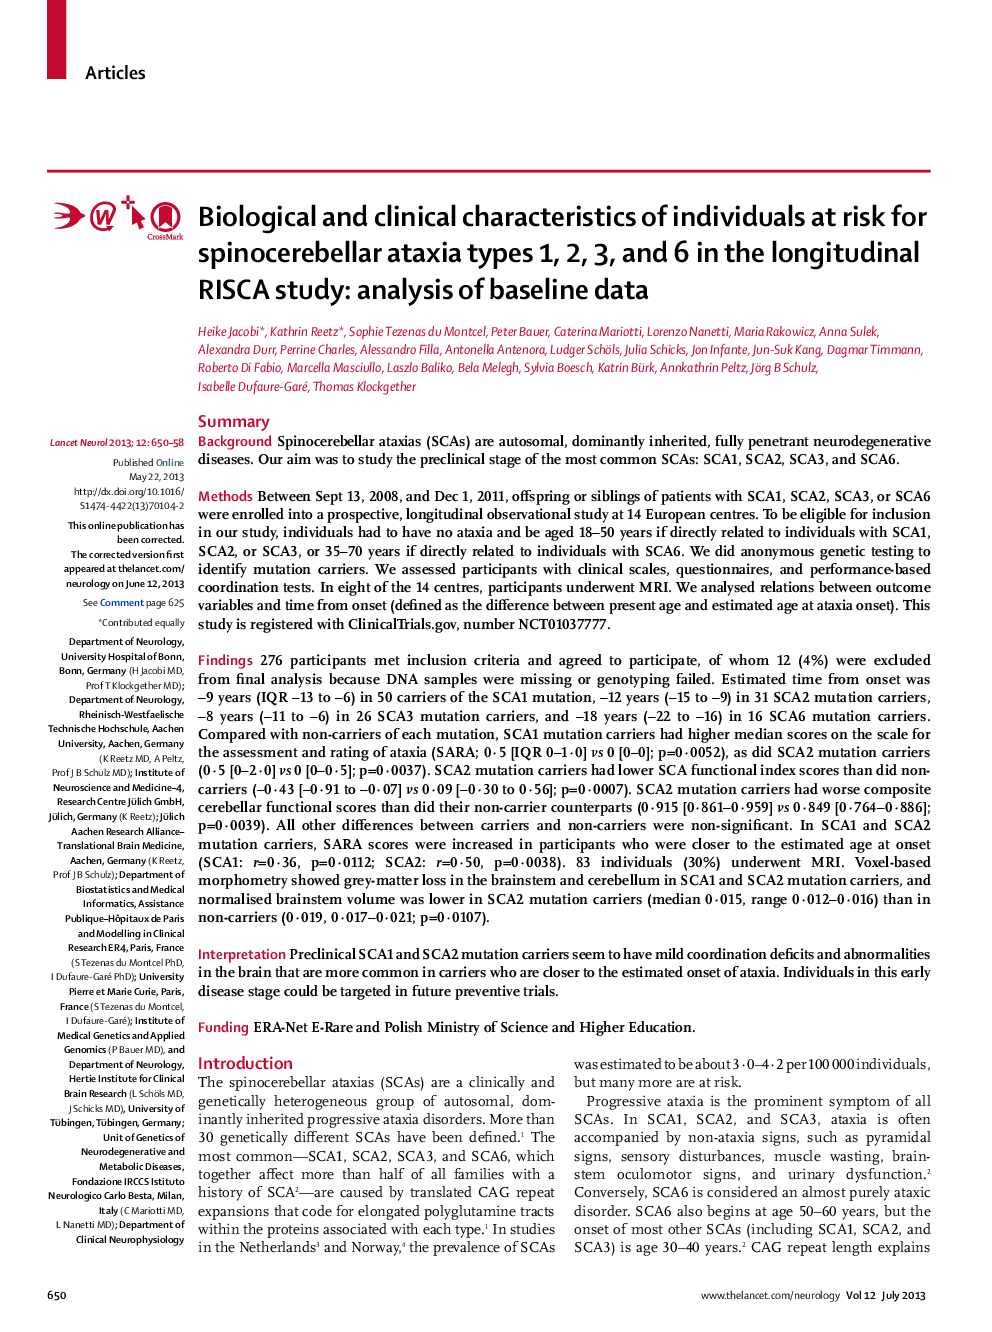 Biological and clinical characteristics of individuals at risk for spinocerebellar ataxia types 1, 2, 3, and 6 in the longitudinal RISCA study: analysis of baseline data